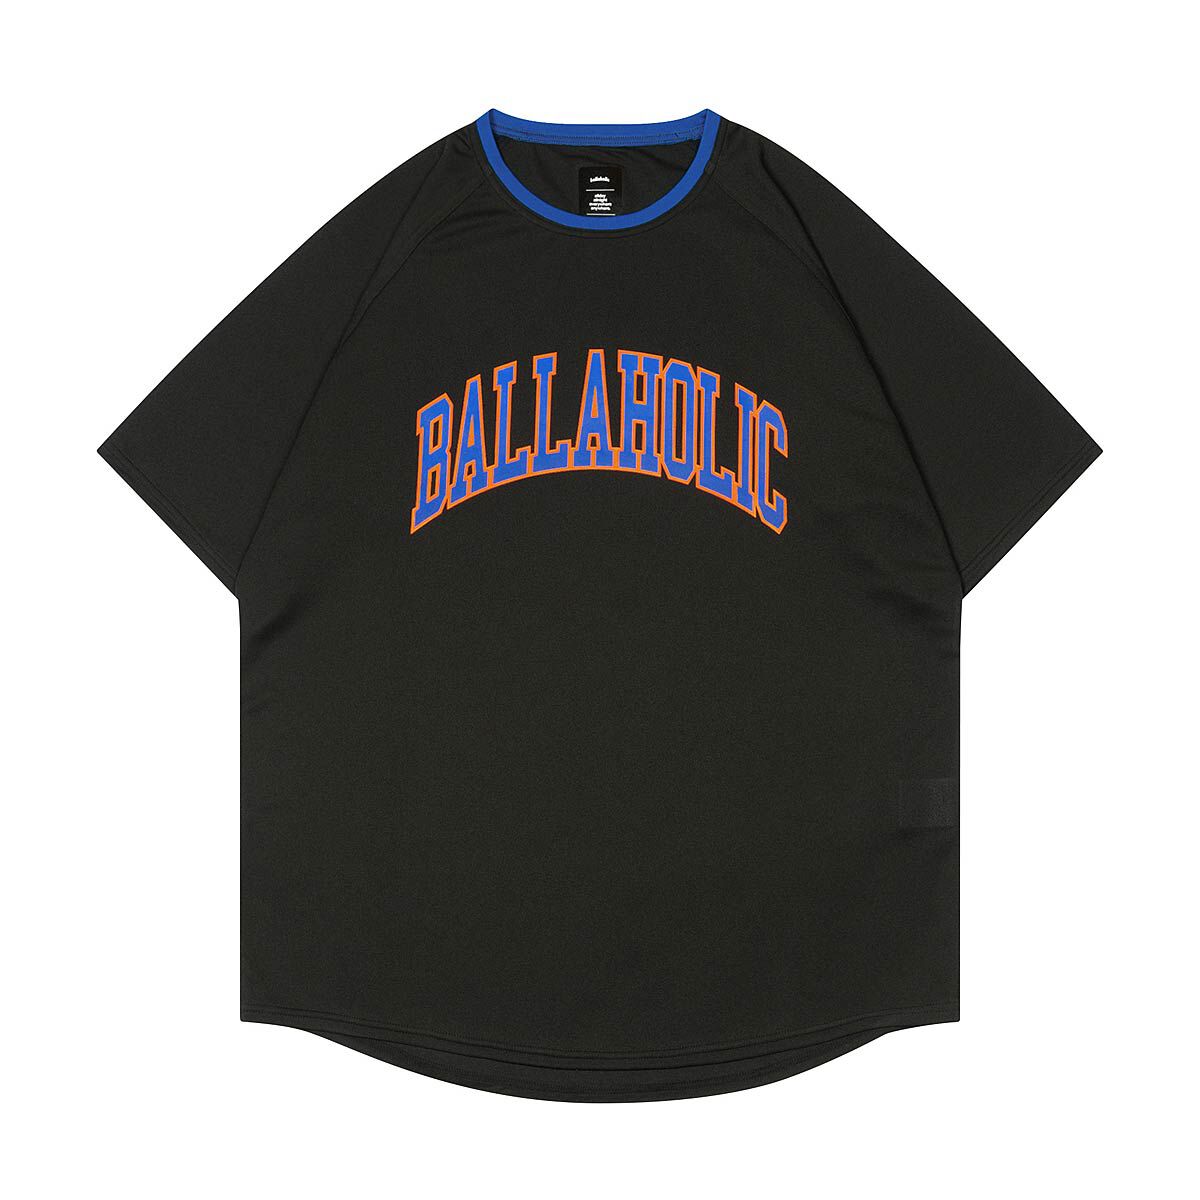 ballaholic: high-quality products available at KICKZ.com